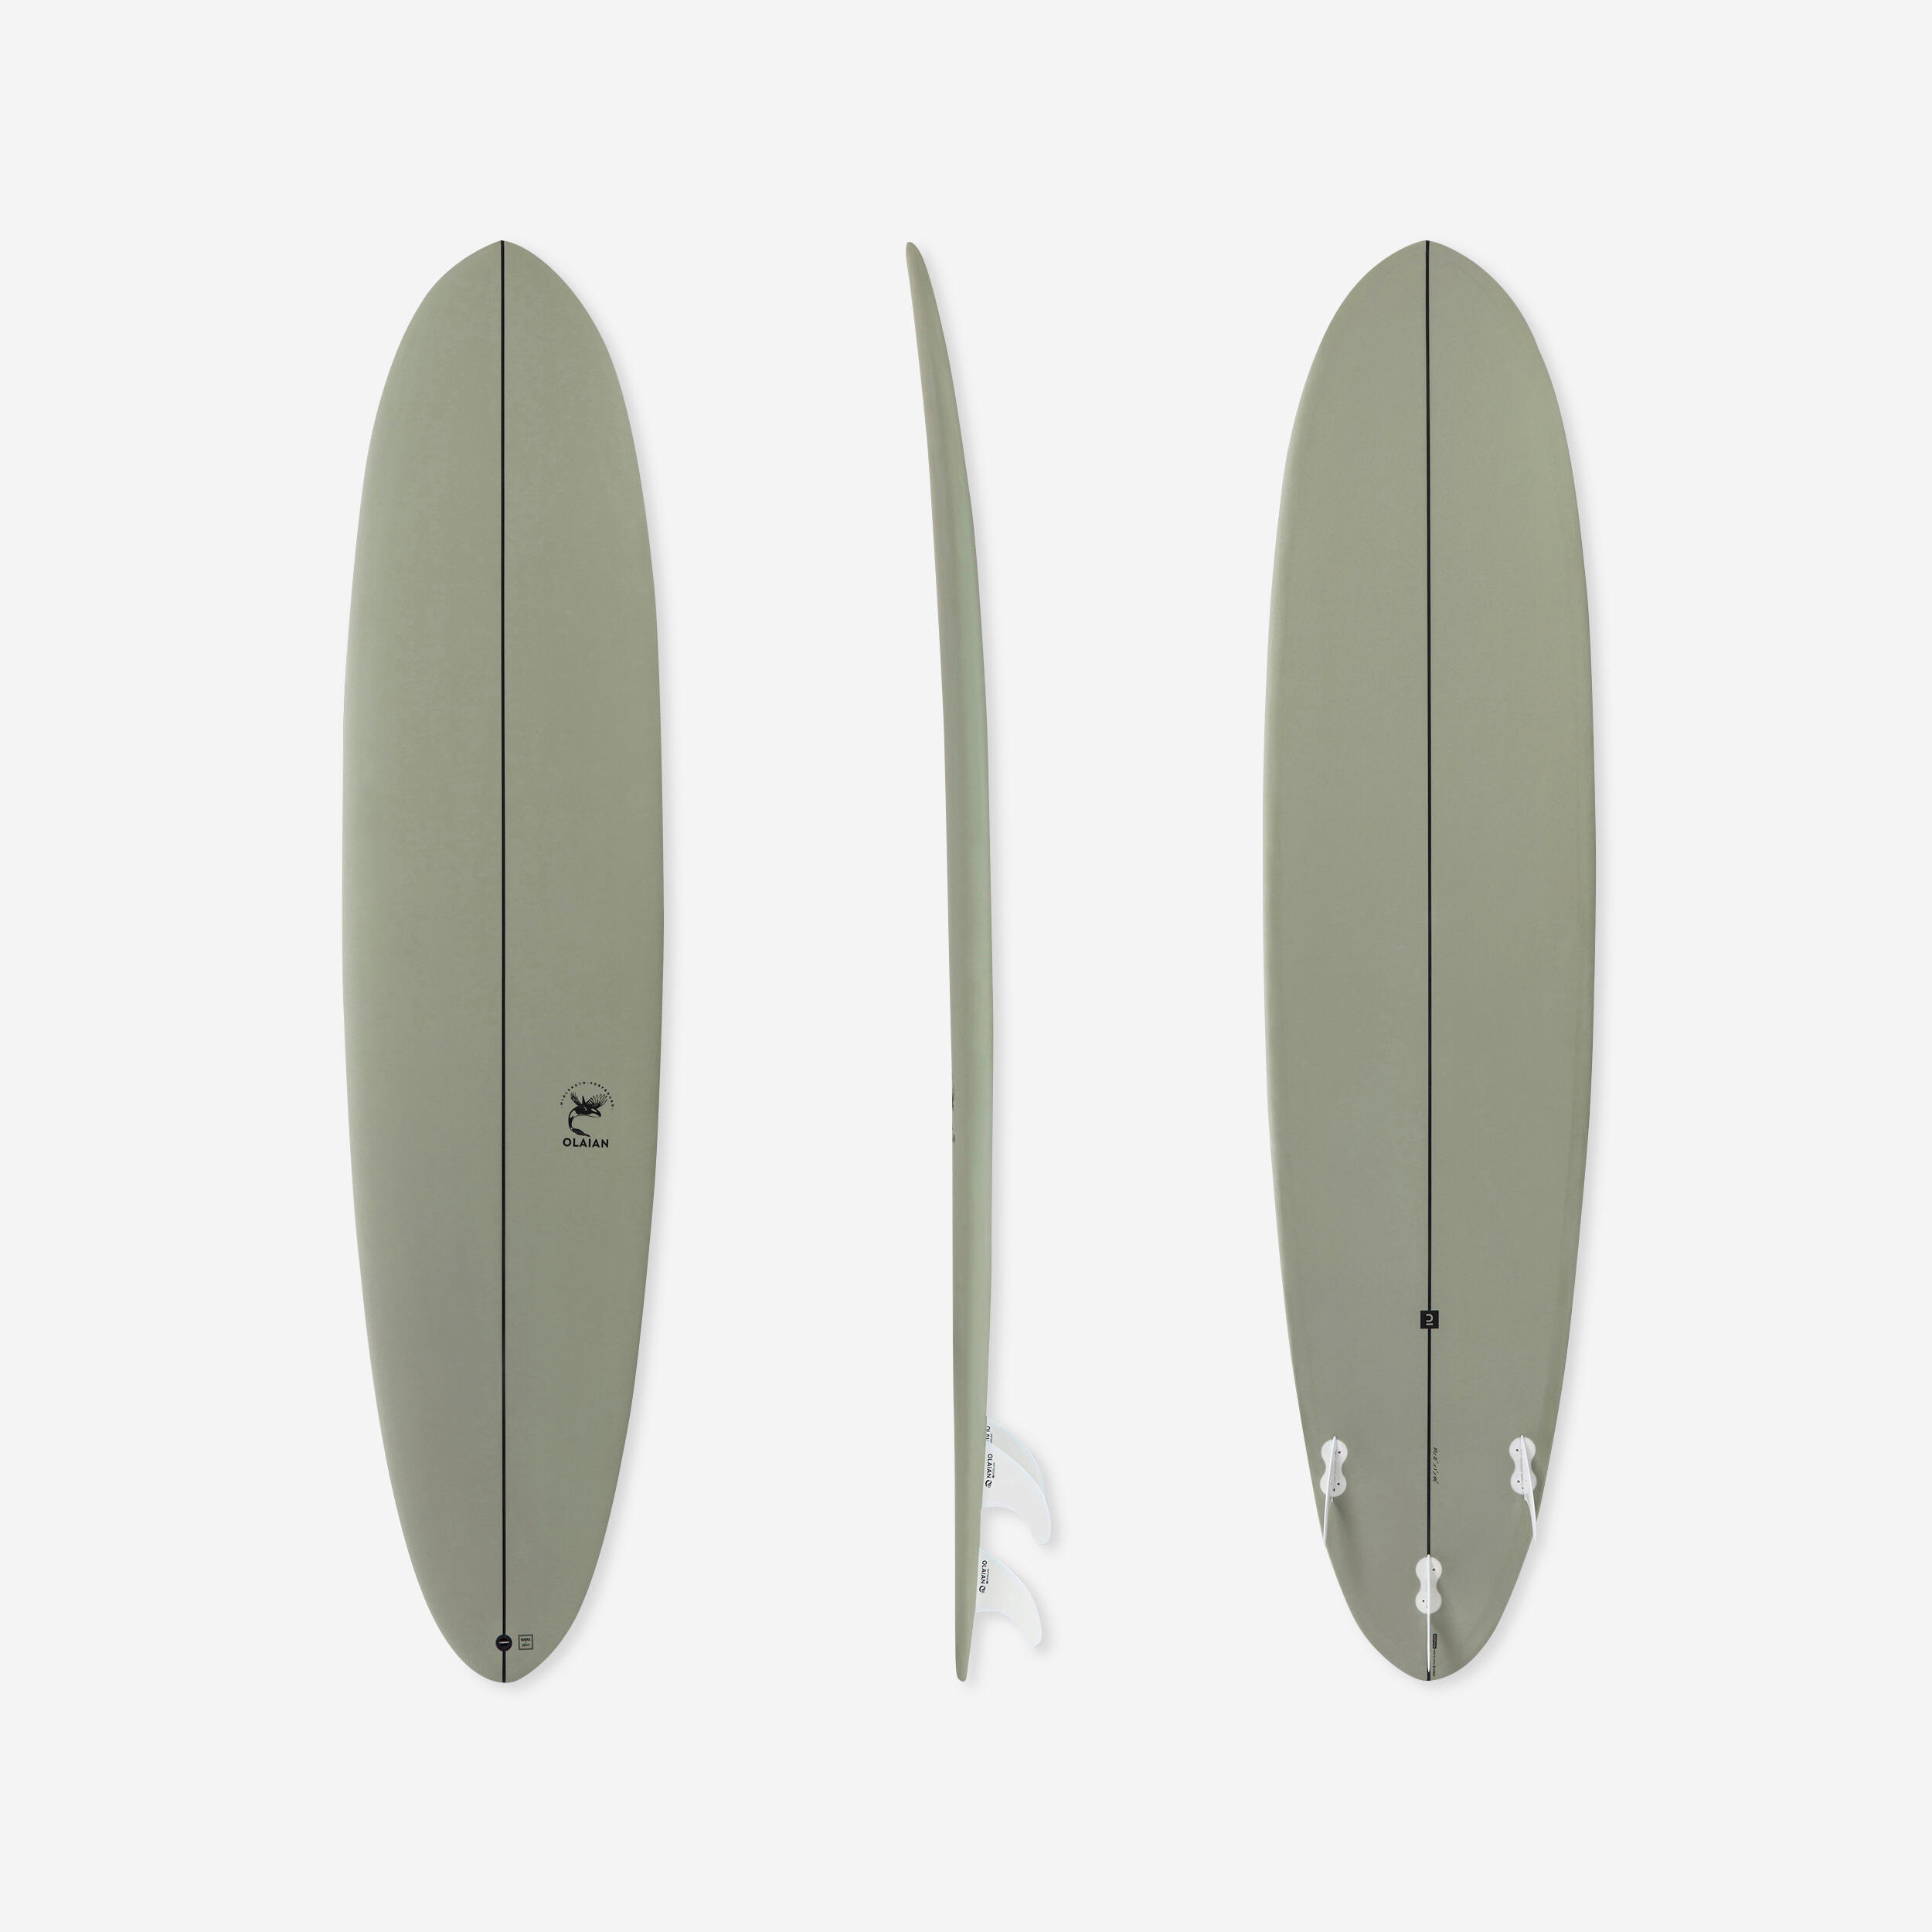 OLAIAN SURFBOARD 500 Hybrid 8' with 3 Fins.